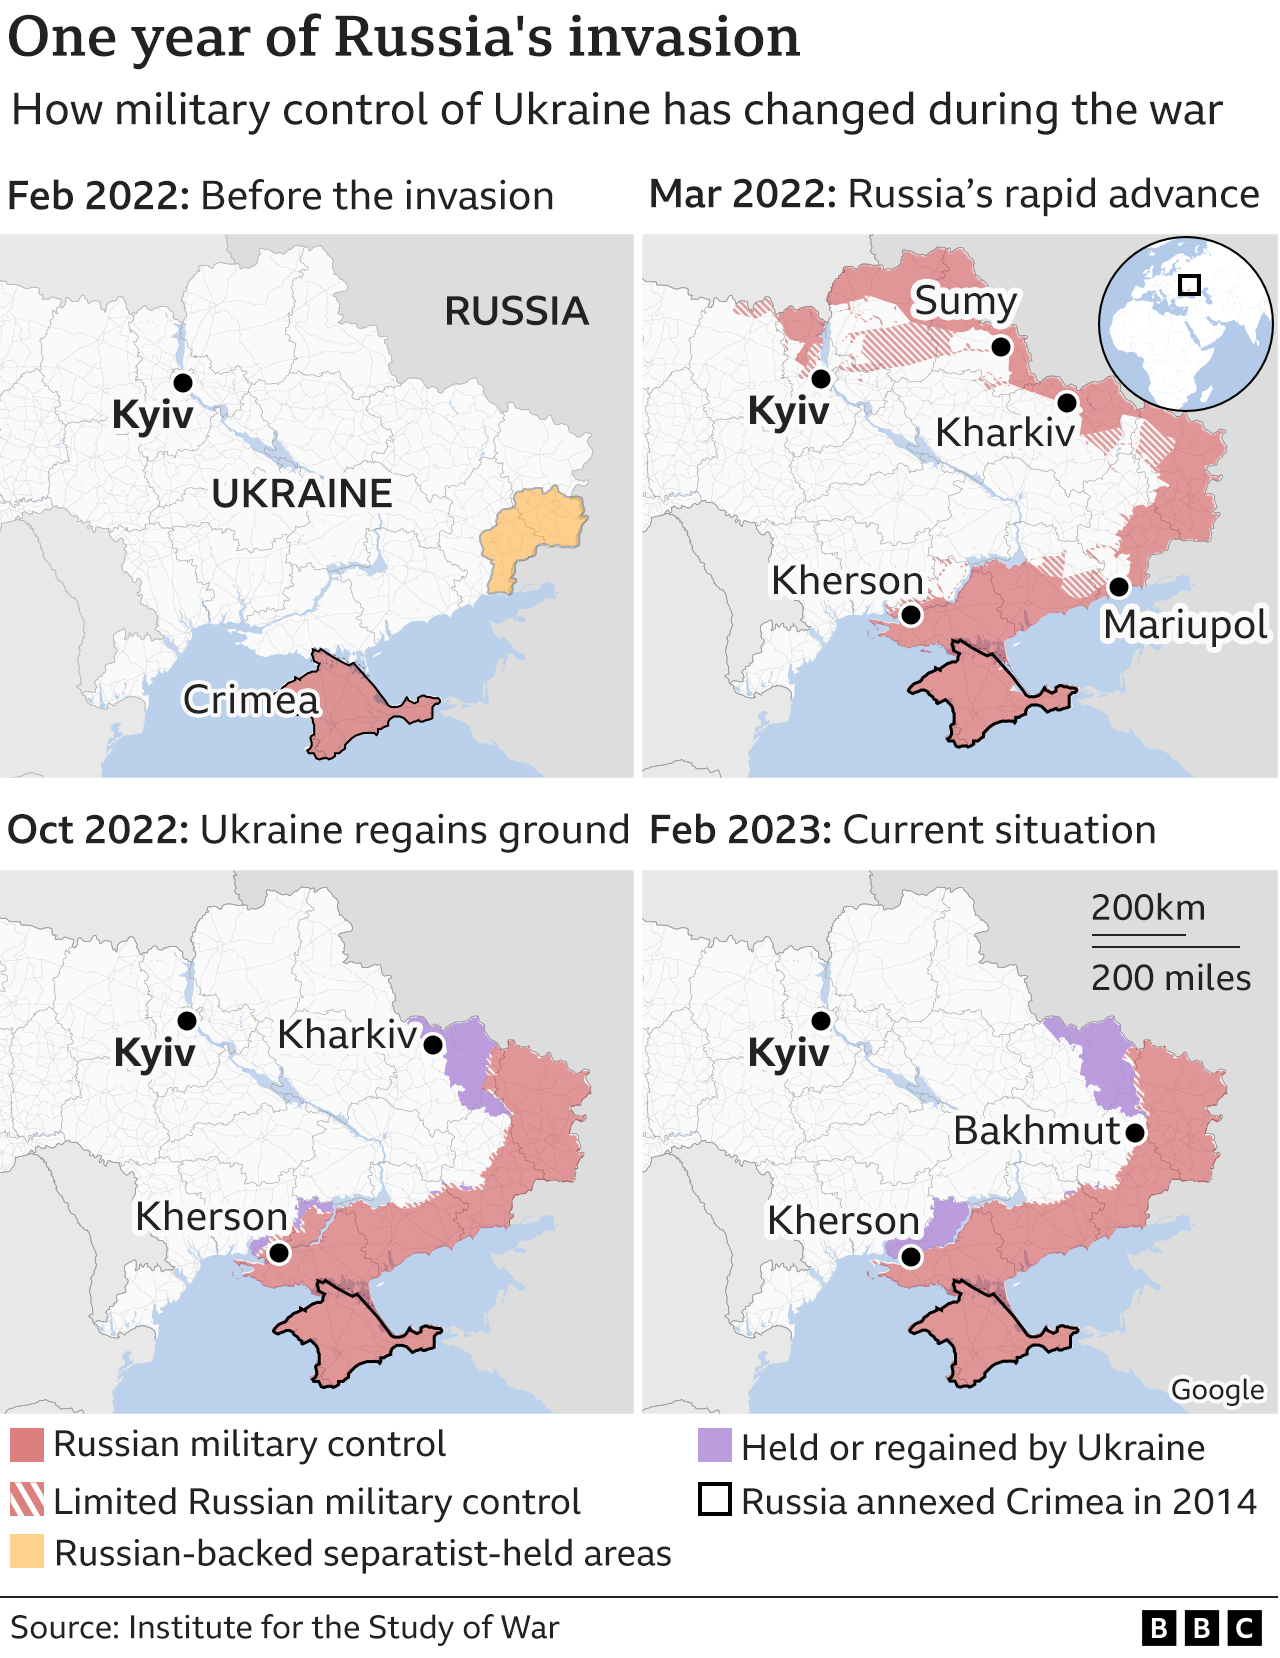 Maps showing territorial control in Ukraine from February 2022 to February 2023